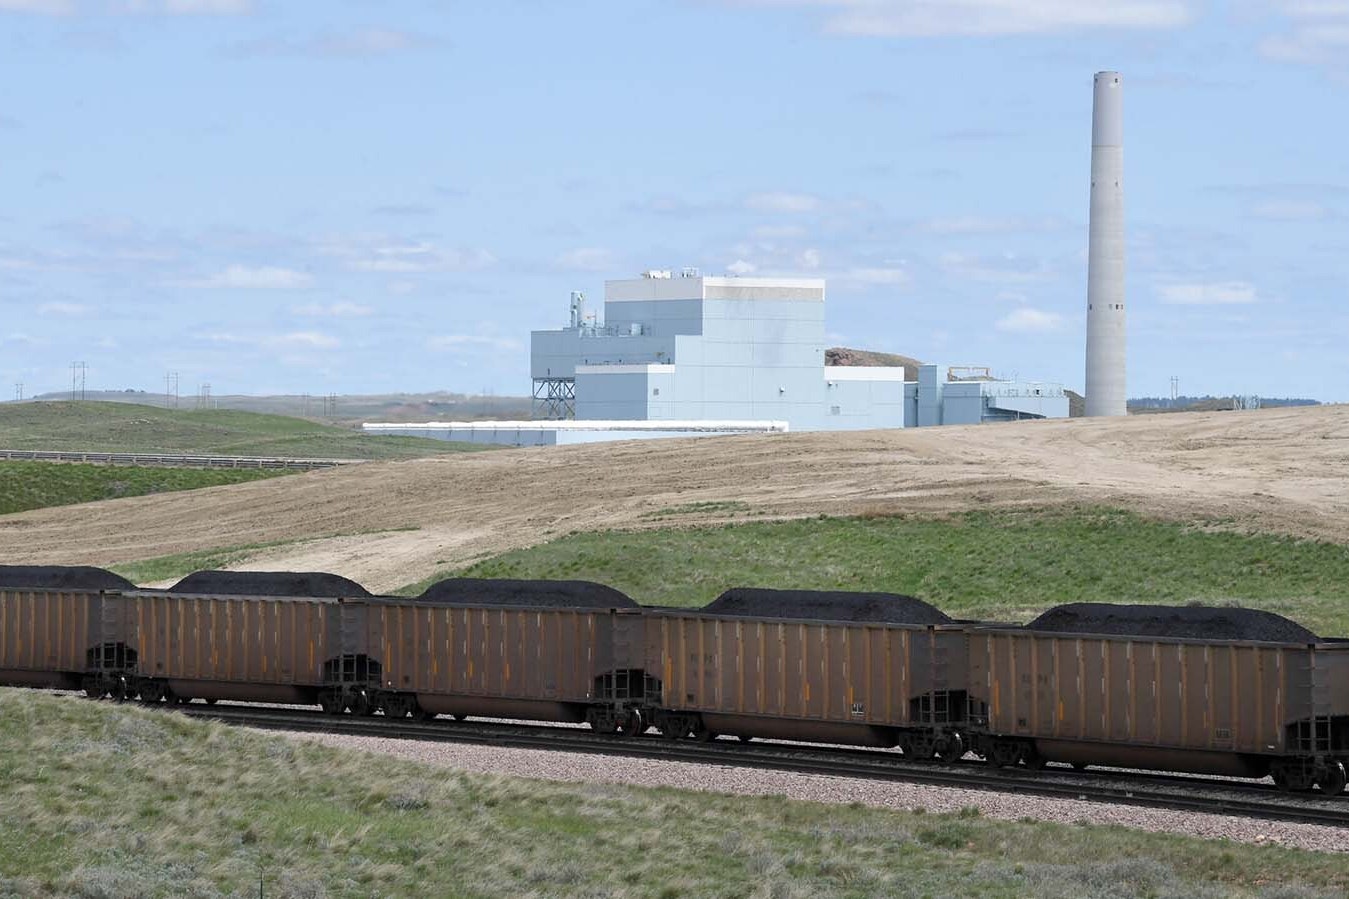 A full coal train rolls through Wyoming's Powder River Basin about 10 miles north of Gillette. The Dry Fork Station coal-fired power plant is in the background.